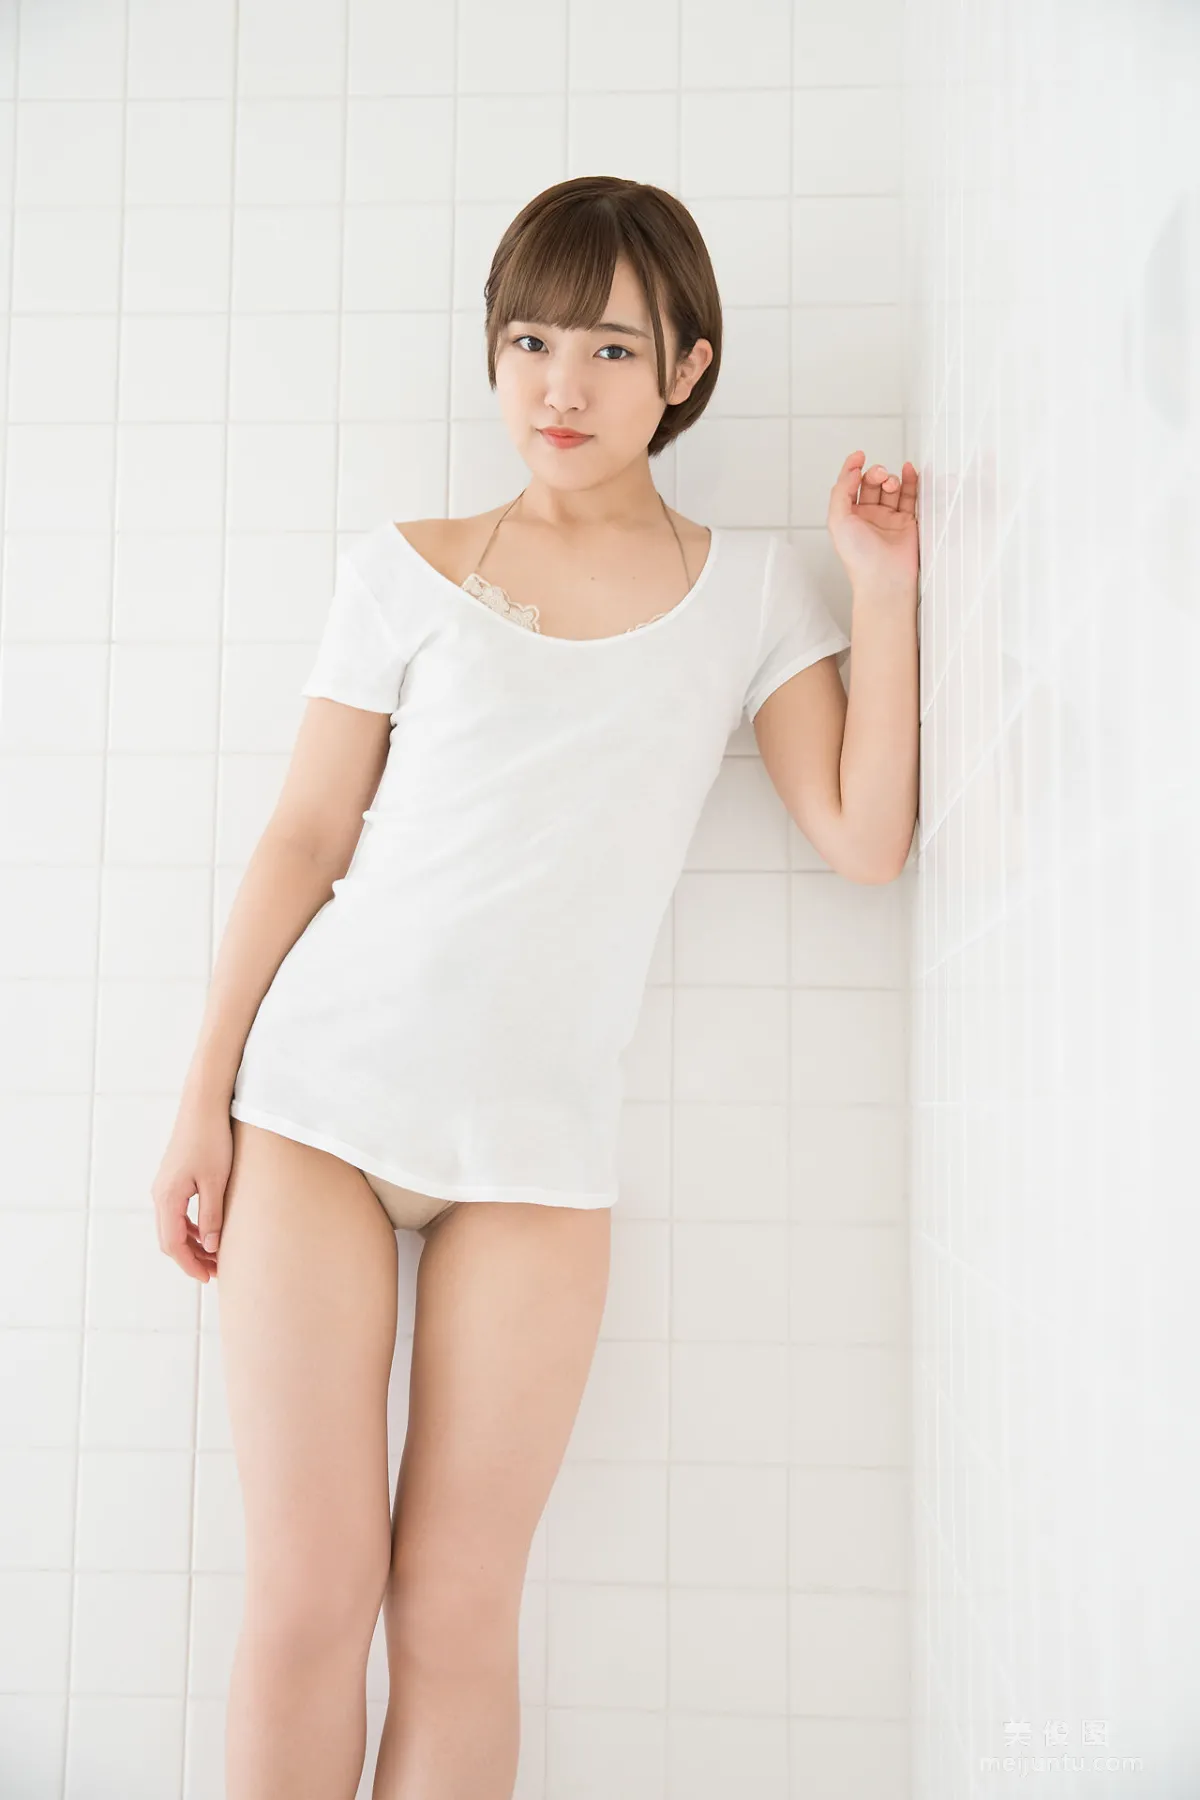 [Minisuka.tv] 香月りお - Special Gallery 13.36